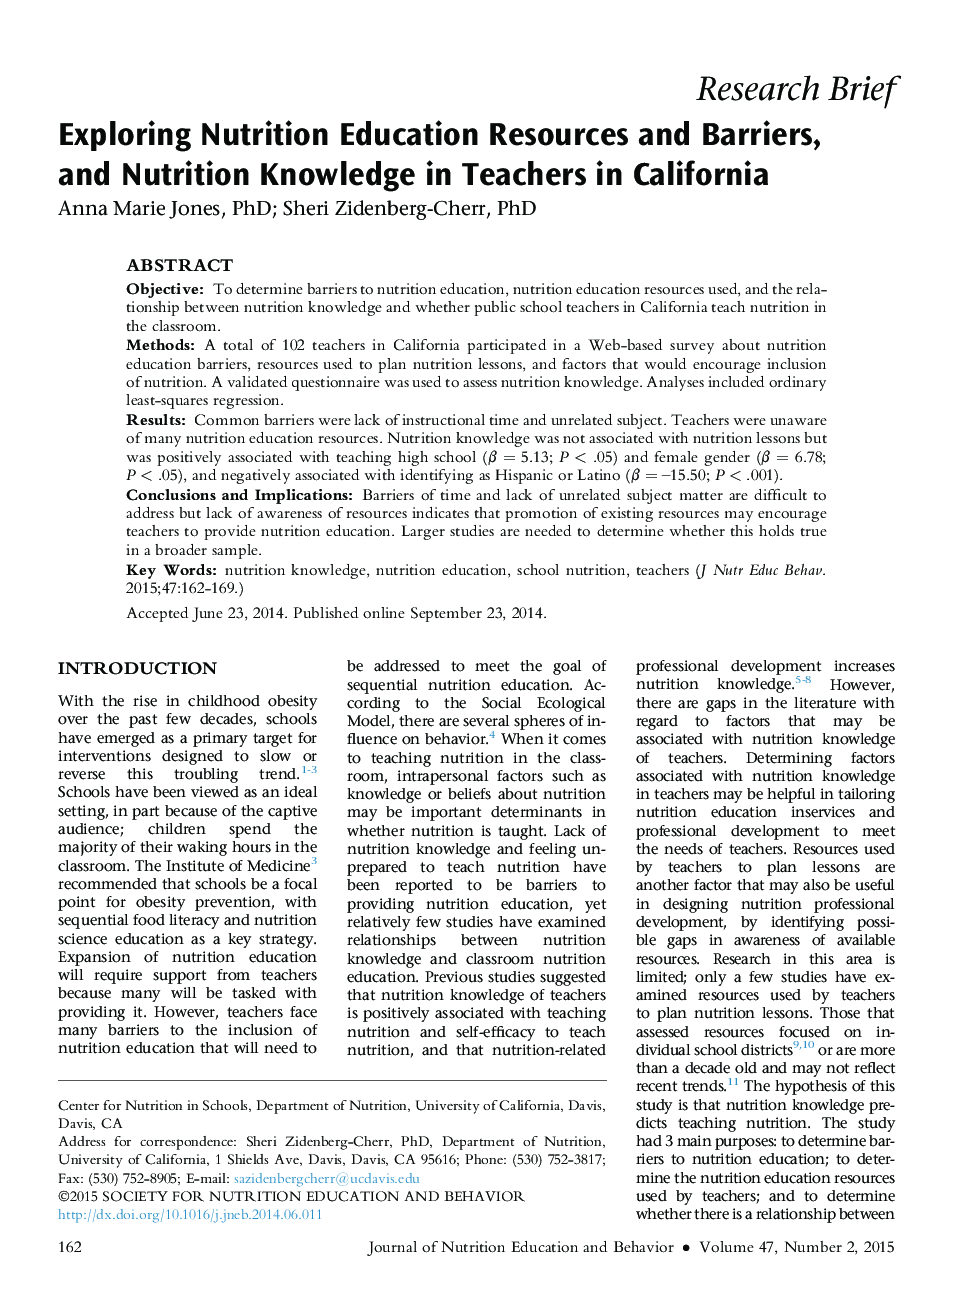 Exploring Nutrition Education Resources and Barriers, and Nutrition Knowledge in Teachers in California